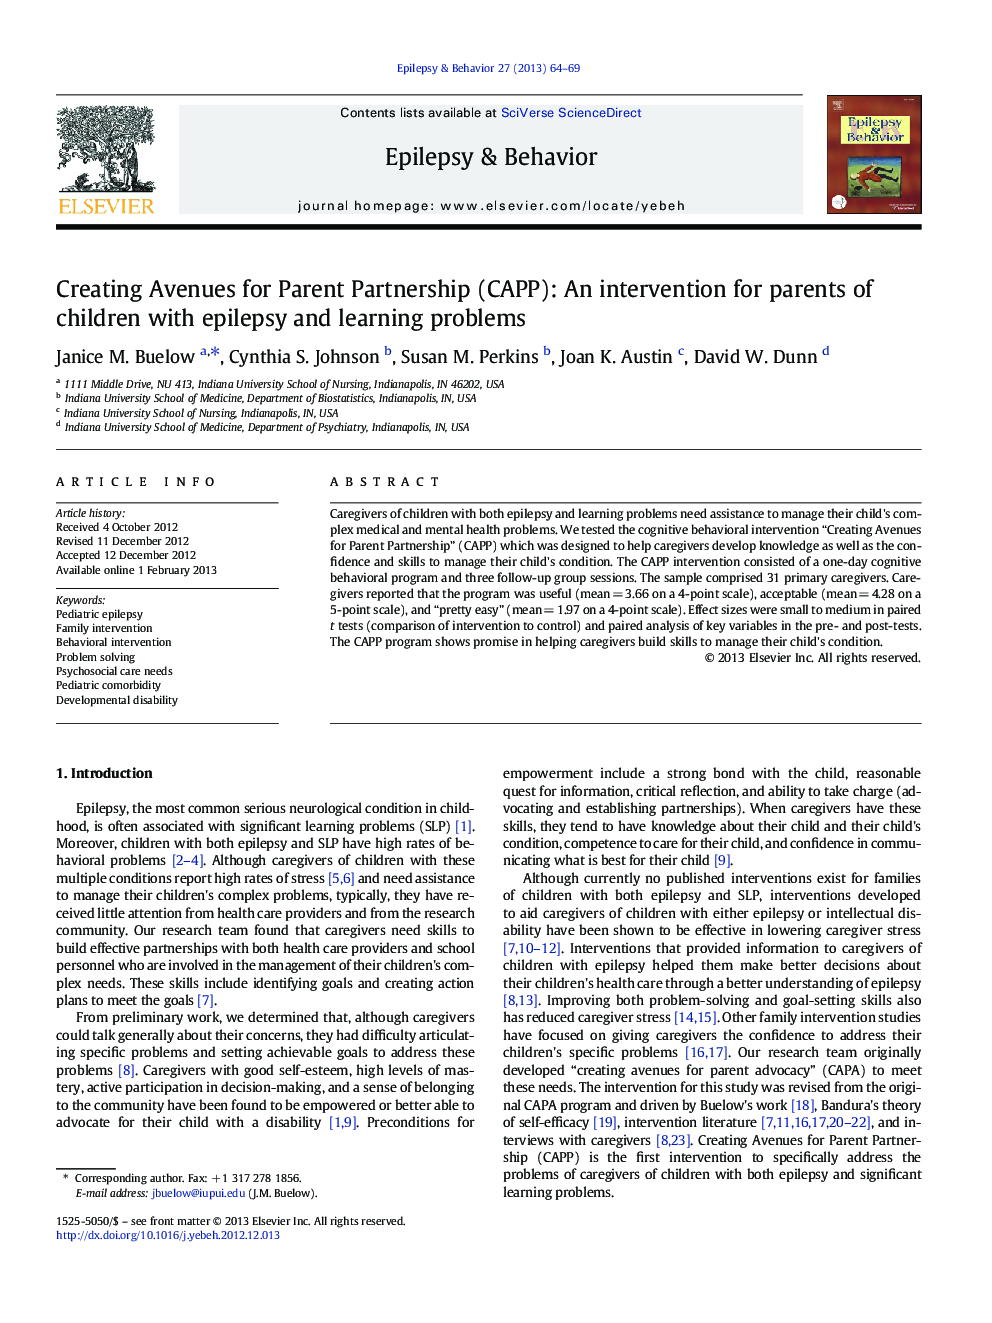 Creating Avenues for Parent Partnership (CAPP): An intervention for parents of children with epilepsy and learning problems